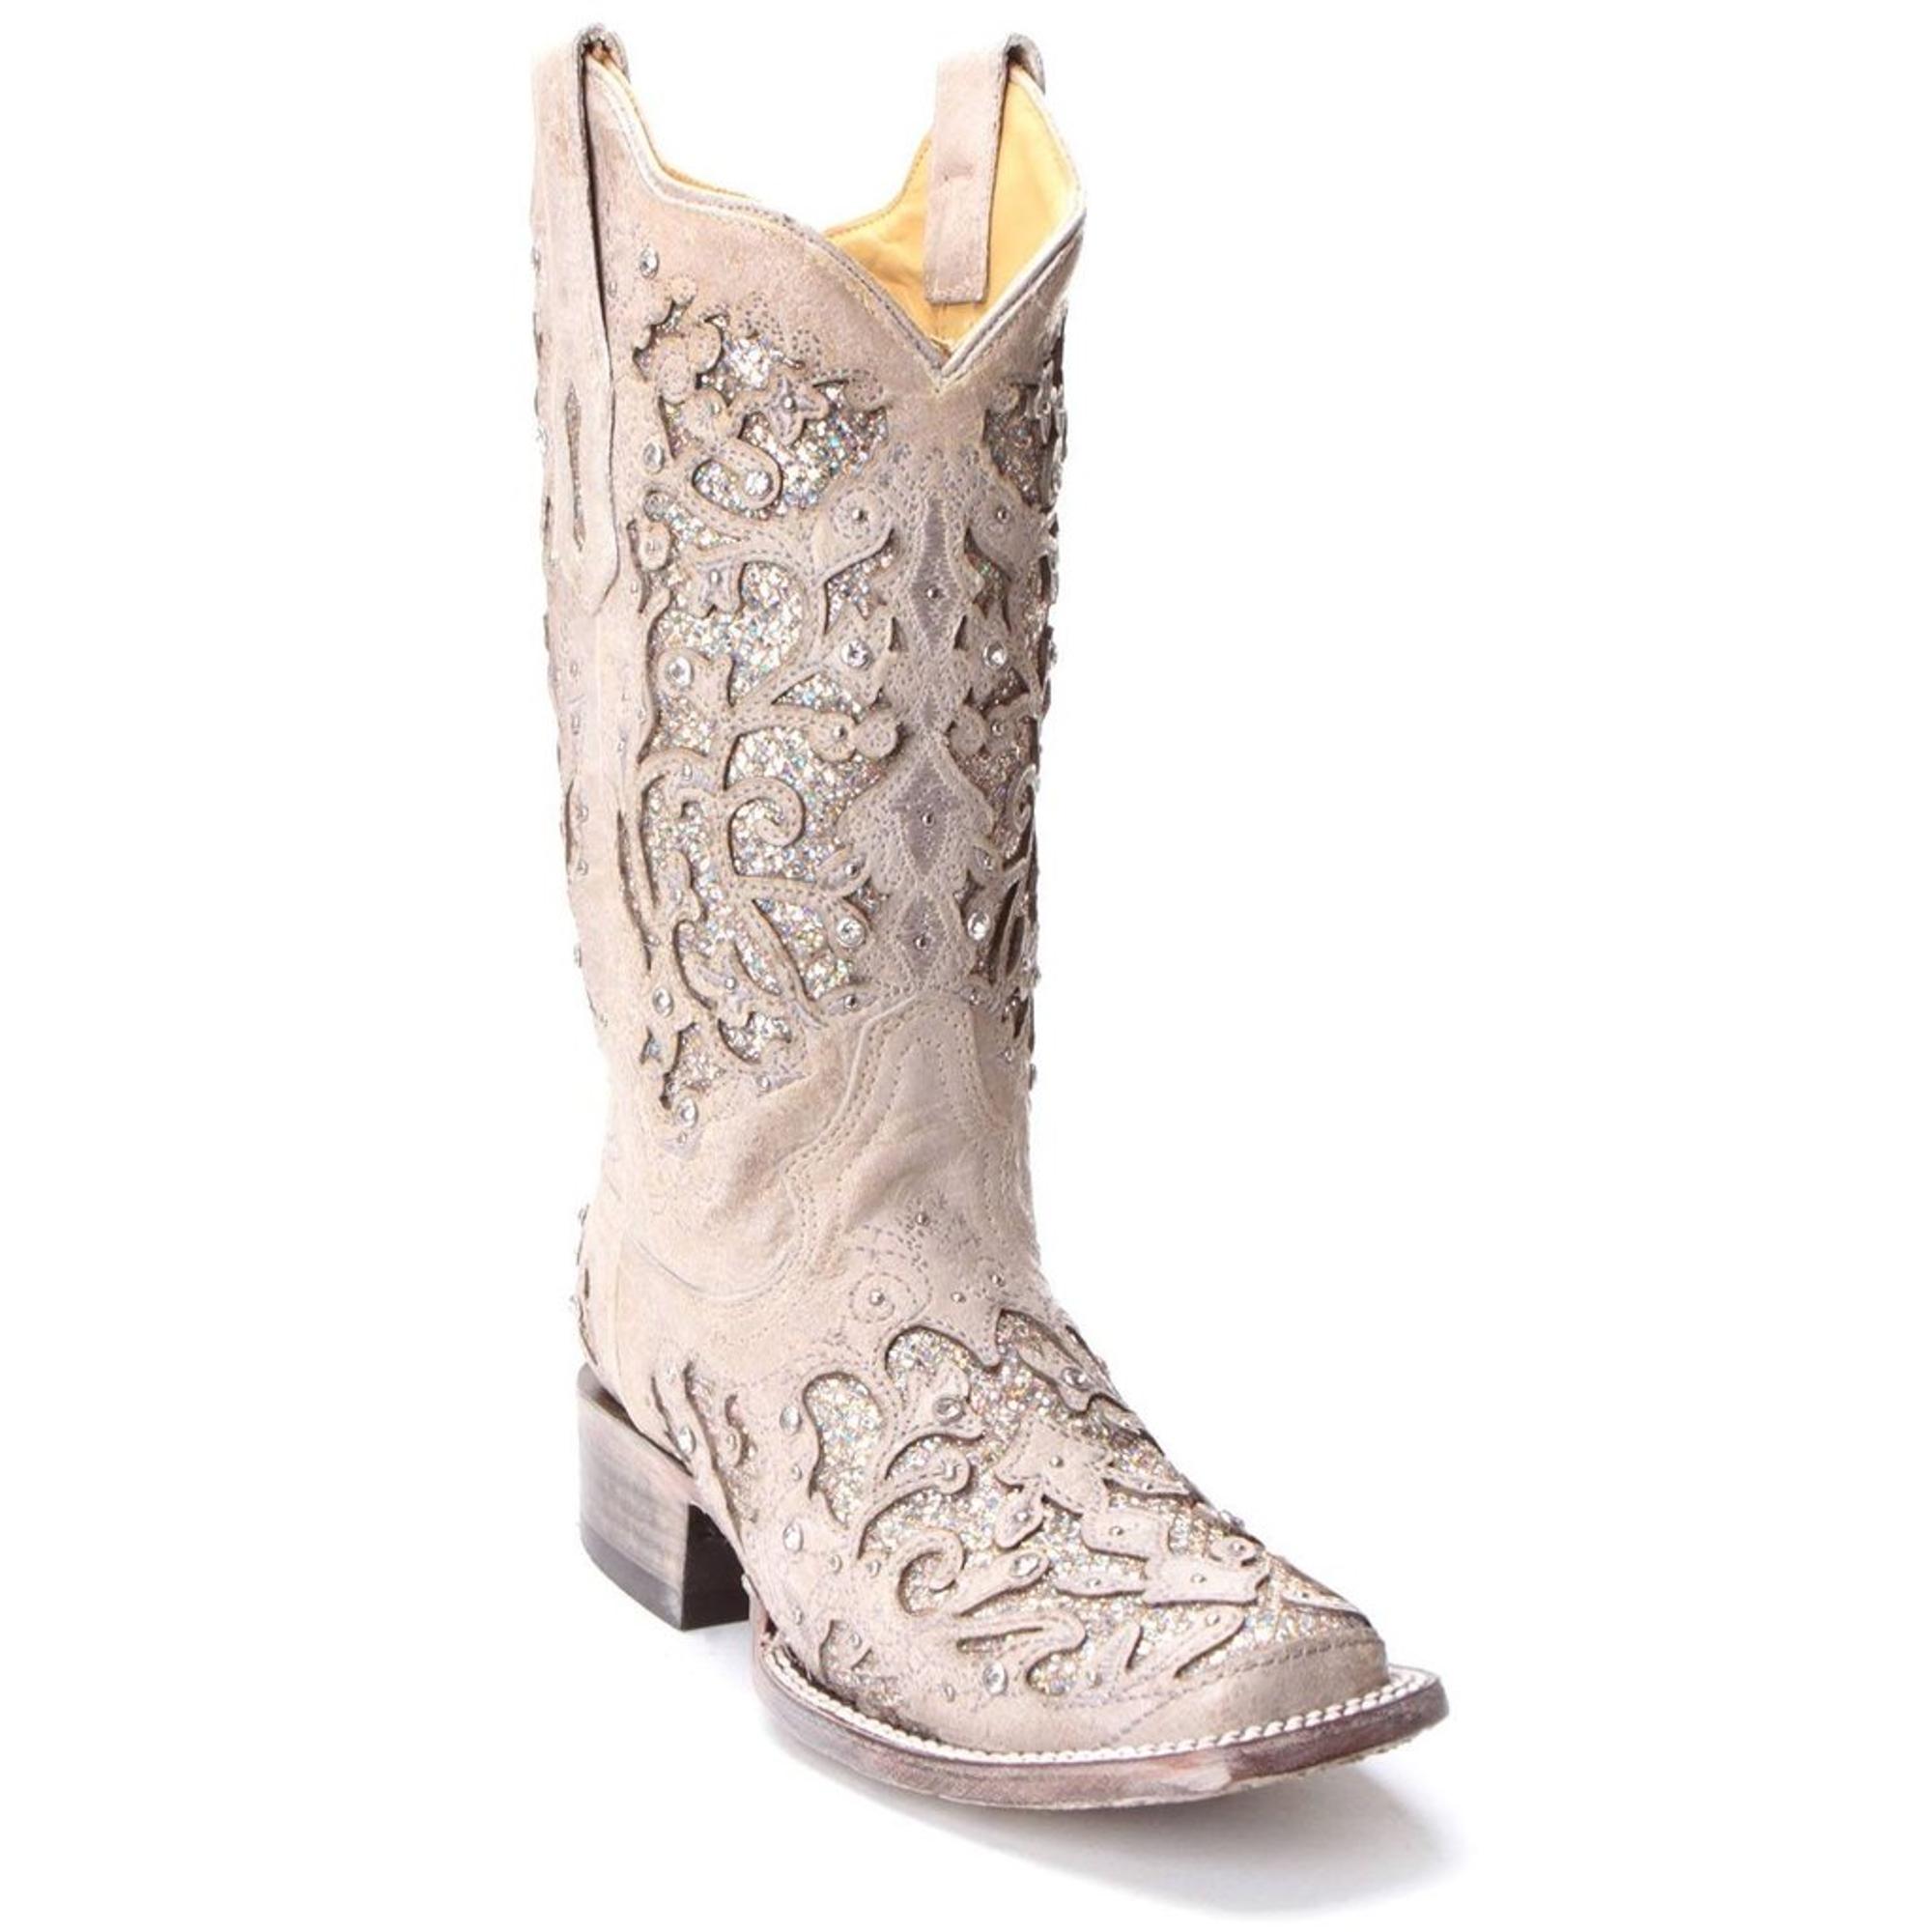 Corral Boots Womens White Glitter Wedding & Fashion Boots A3397